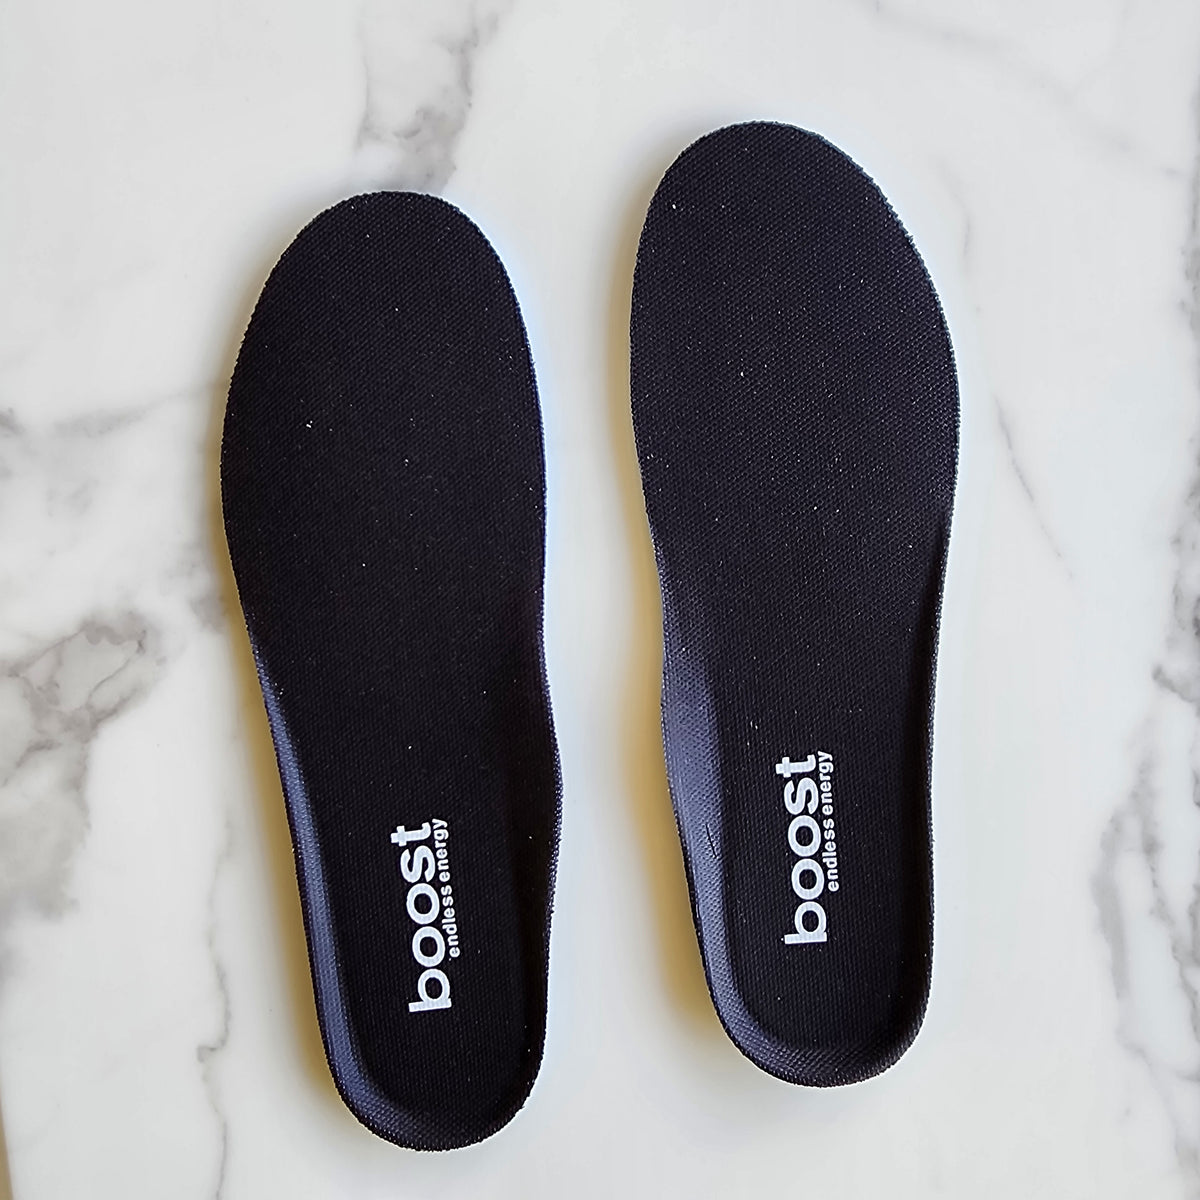 Boost endless, shoe inner sole